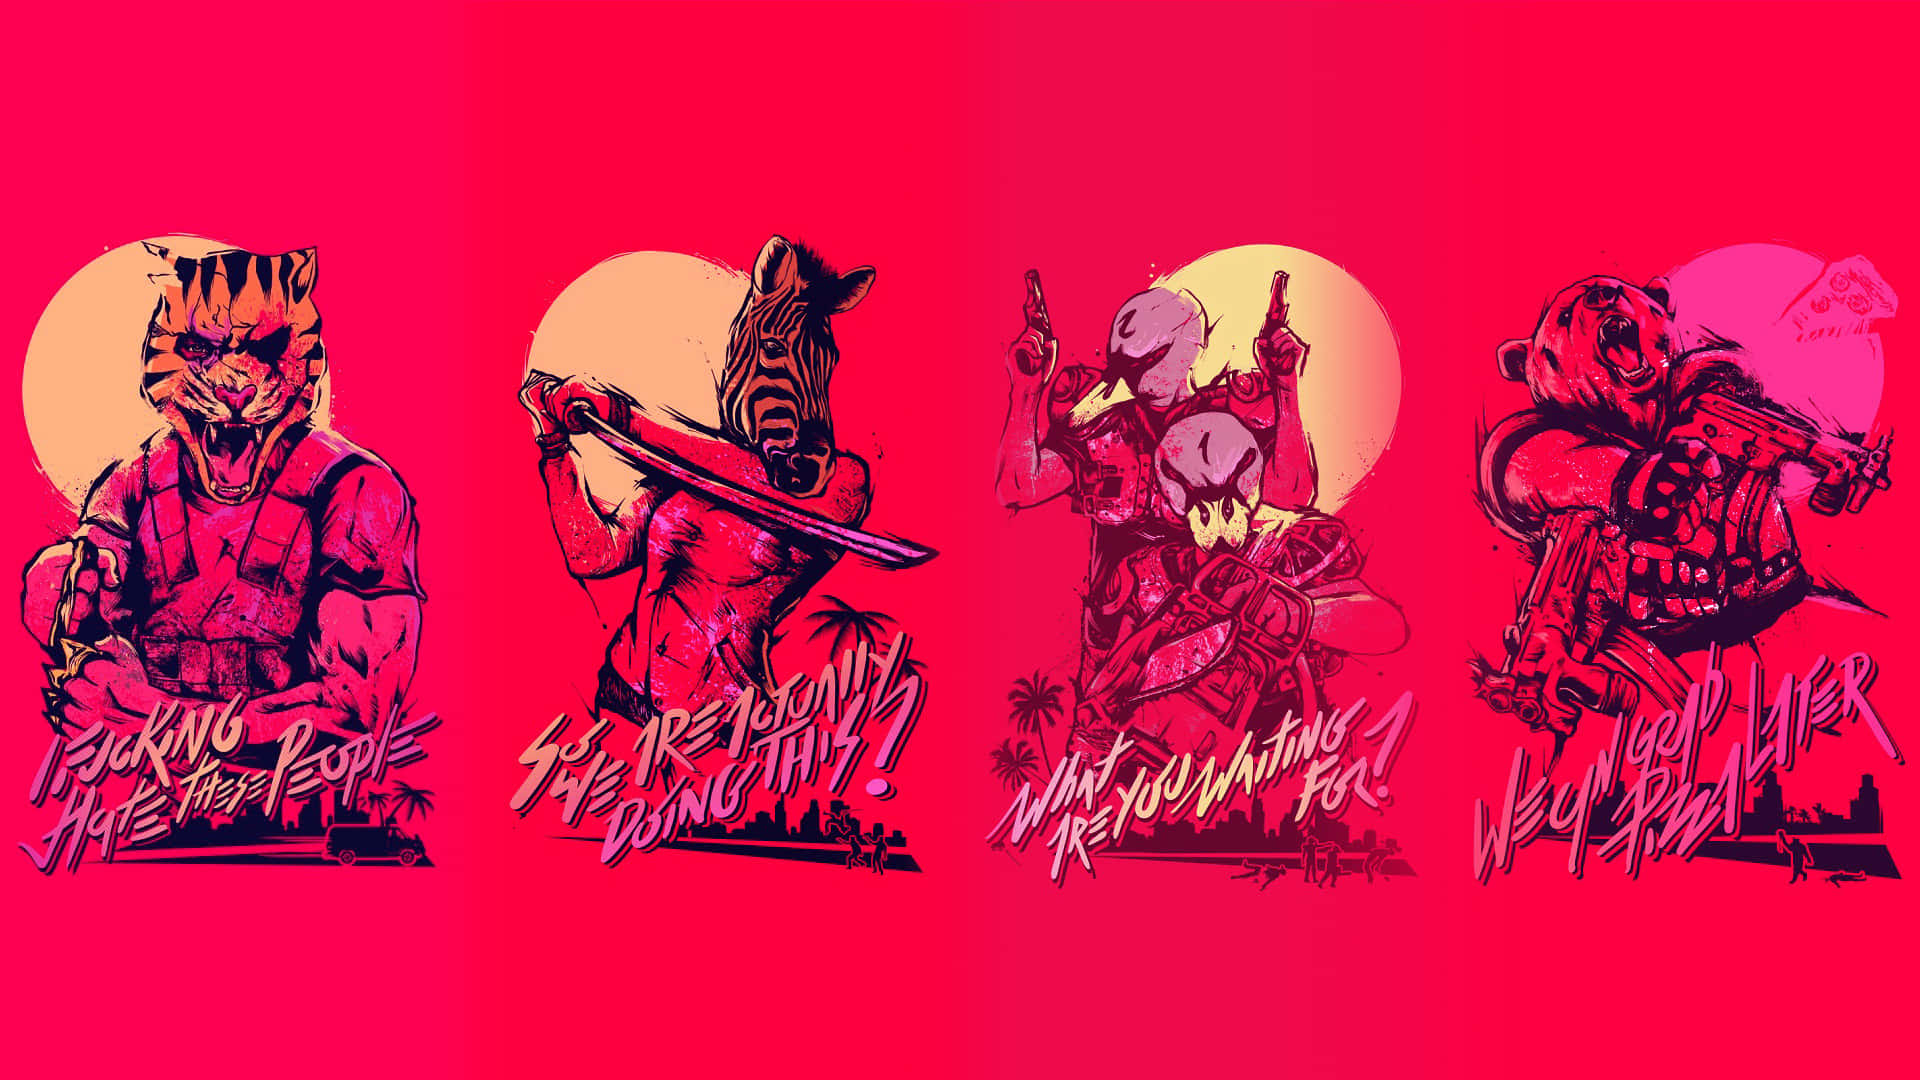 Intense action in Hotline Miami background